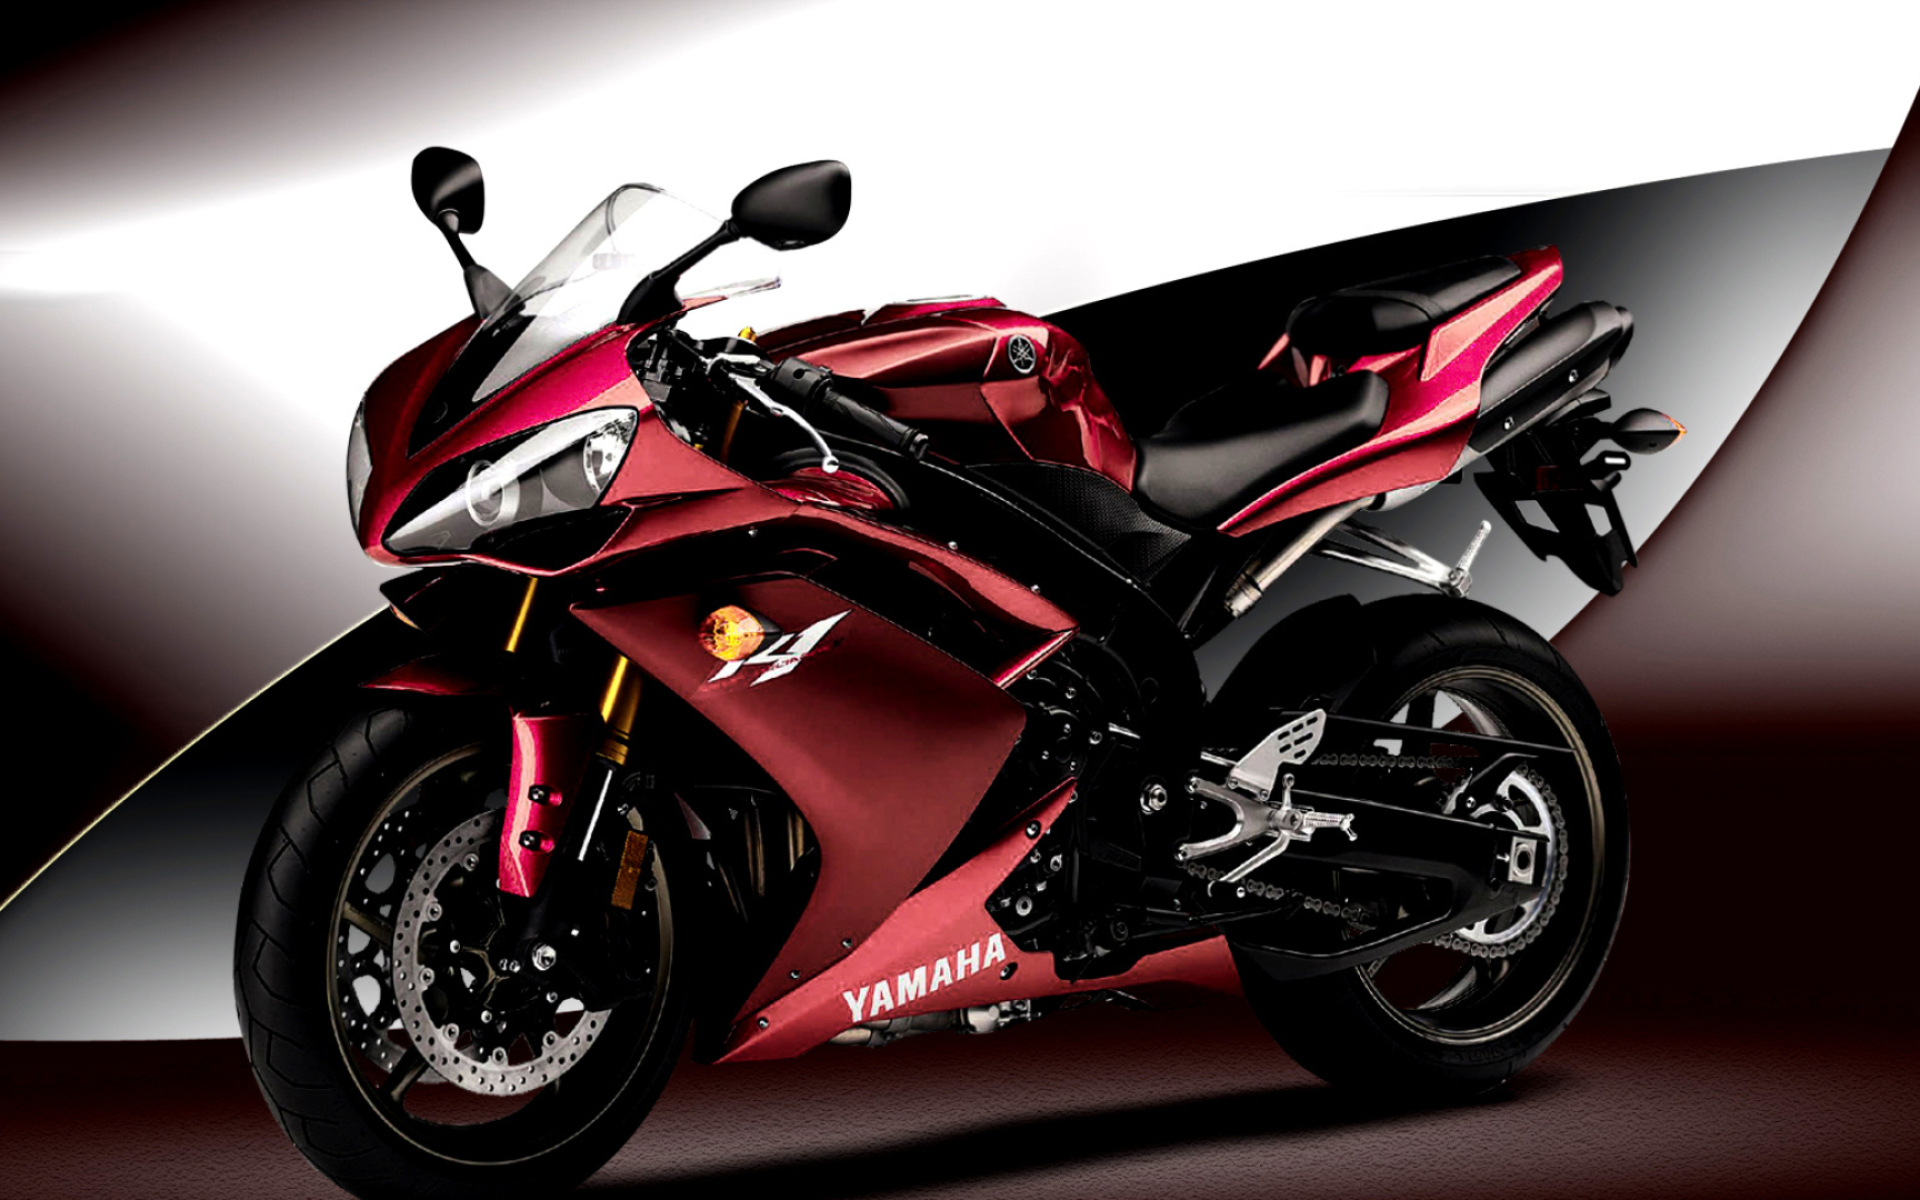 Yamaha YZF-R1, Auto connoisseur's choice, Striking red color, Eye-catching design, 1920x1200 HD Desktop